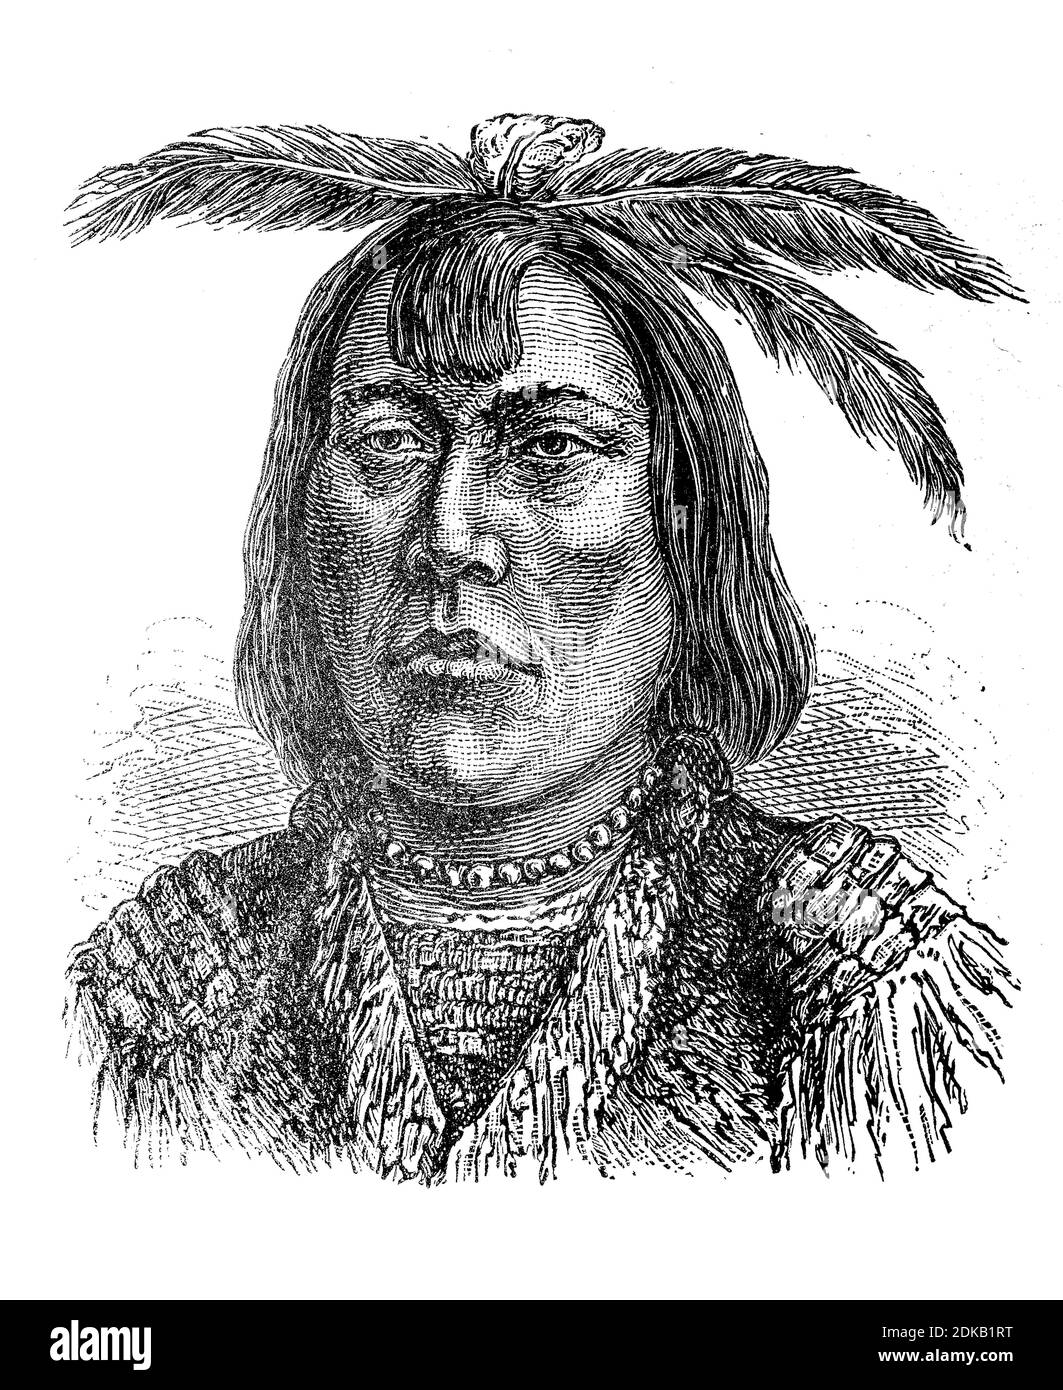 Native American, here an Indian of the American Northwest, illustration from 1880  /  Indianer, hier ein Indianer der amerikanischen Nordwesten, Illustration aus 1880, Historisch, historical, digital improved reproduction of an original from the 19th century / digitale Reproduktion einer Originalvorlage aus dem 19. Jahrhundert Stock Photo